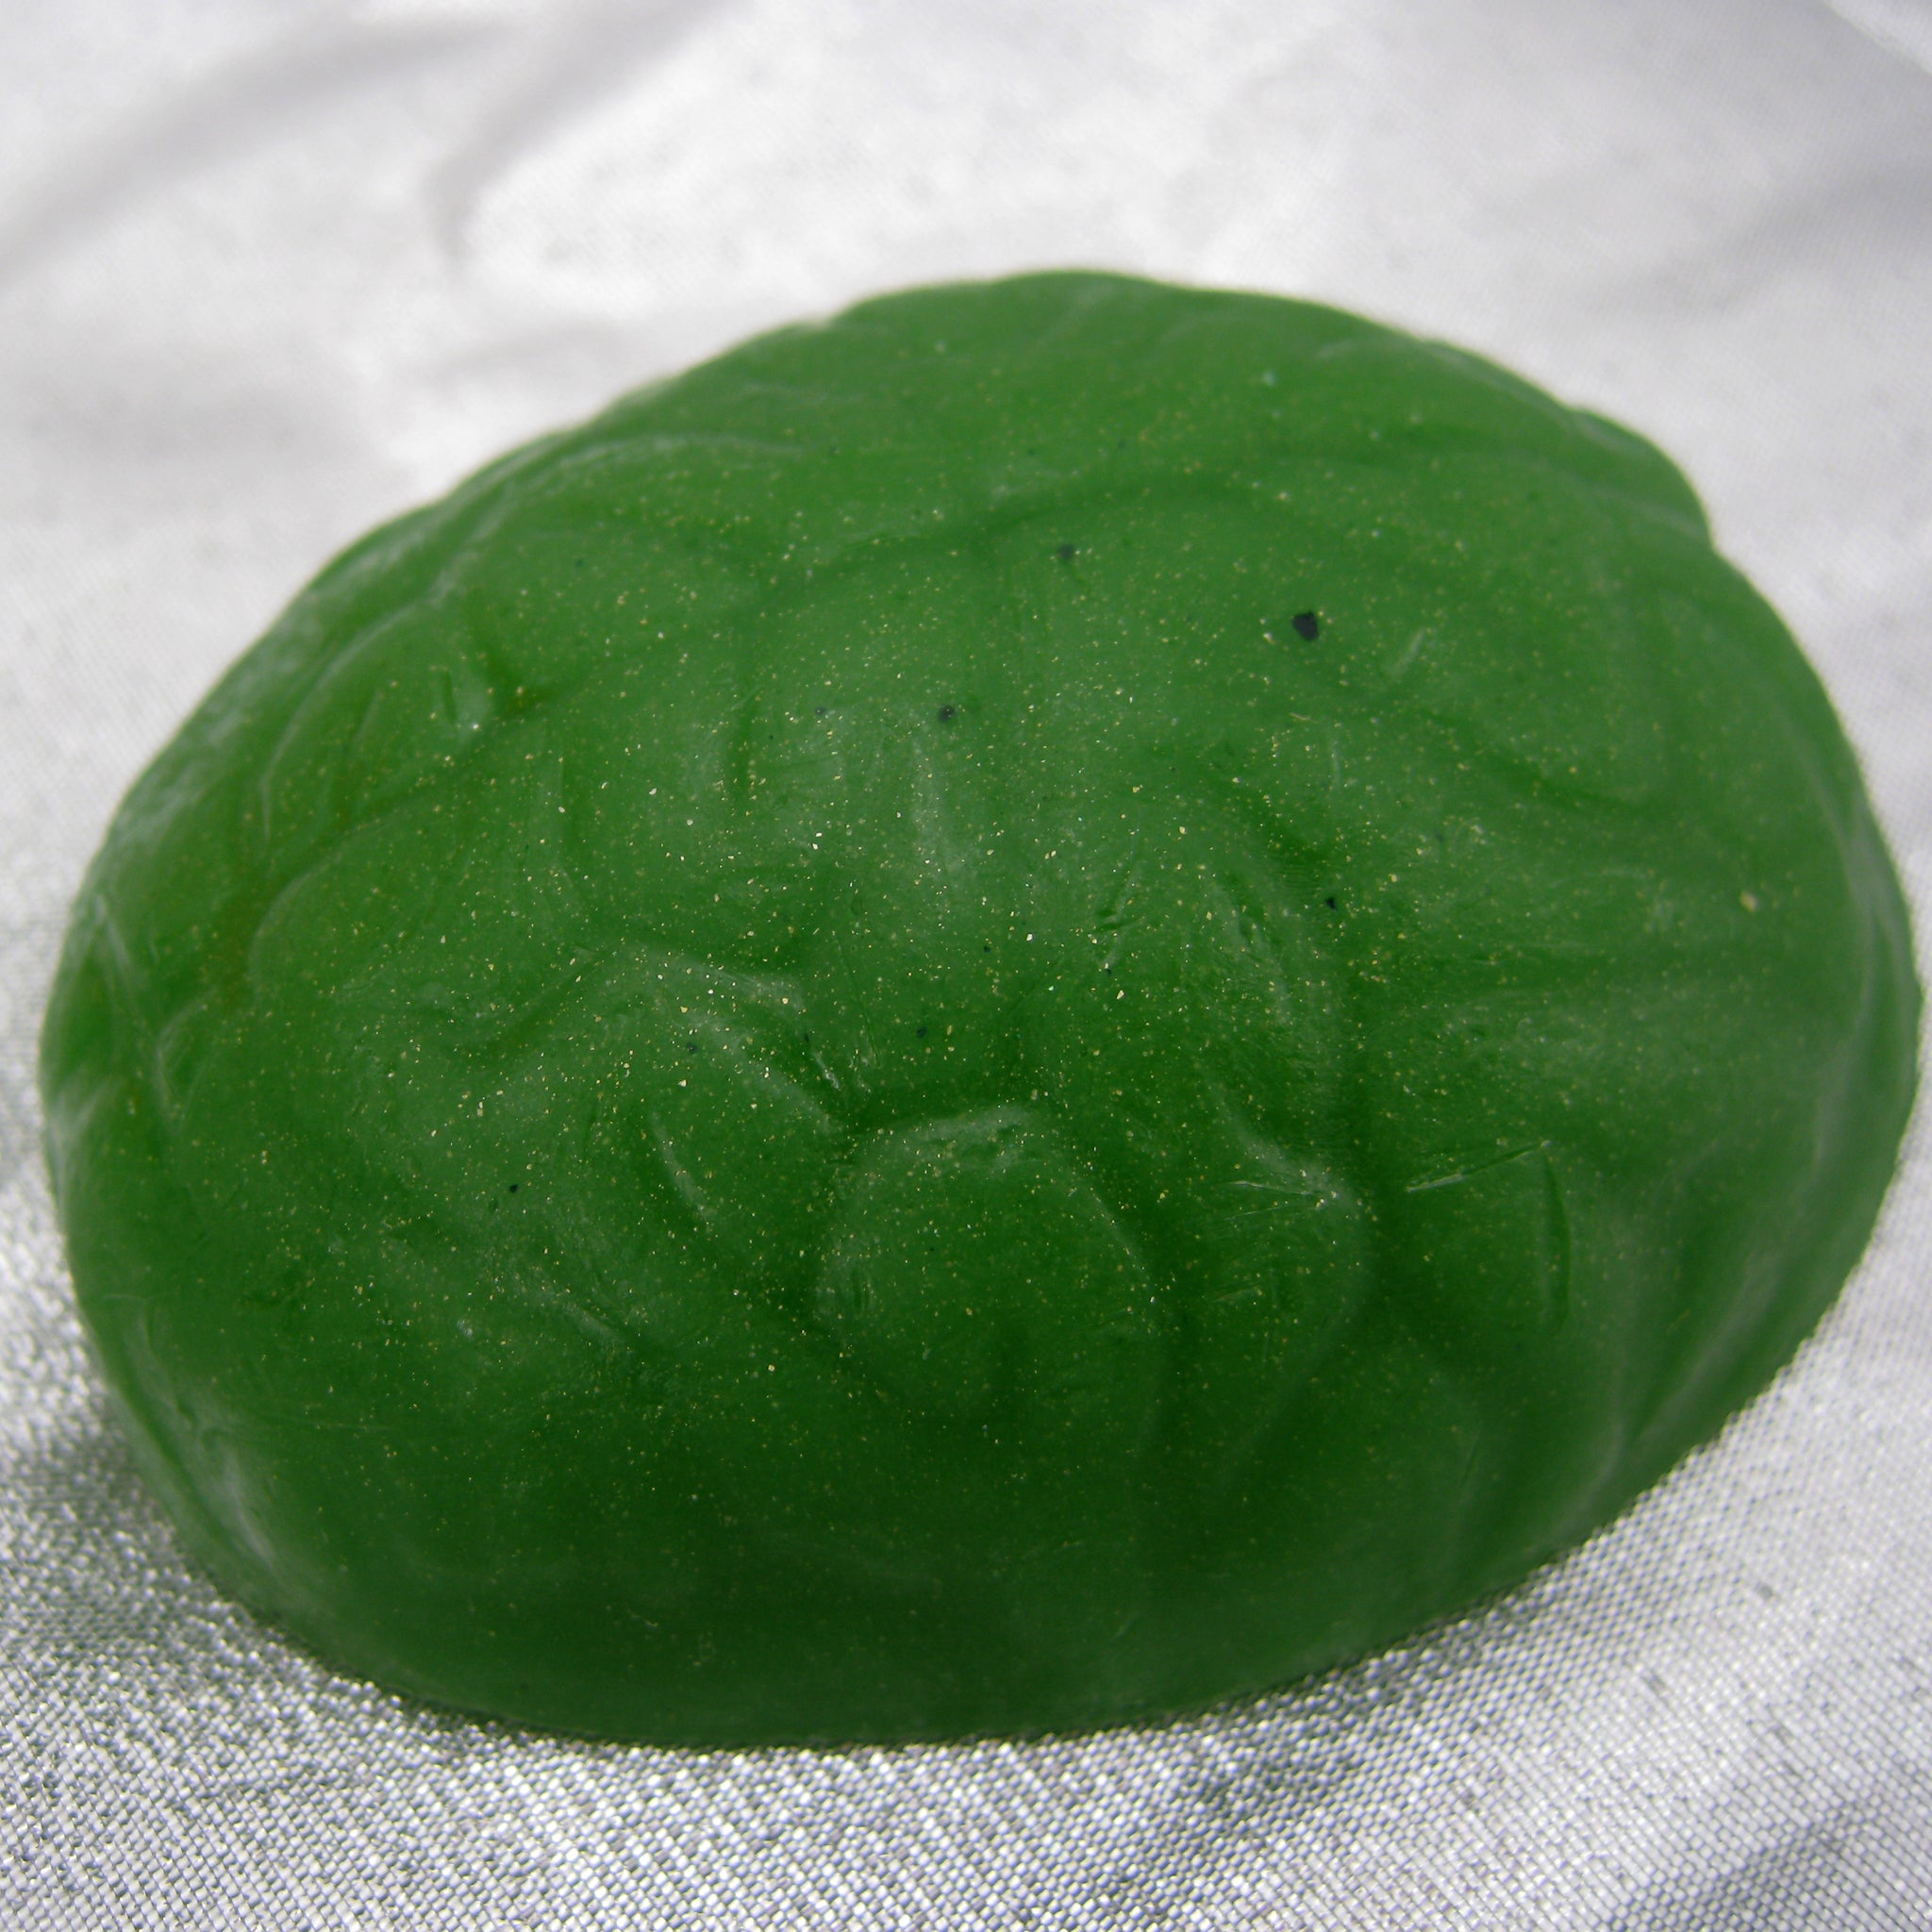 This is Your Brain on Drugs Cannabis Brain Soap